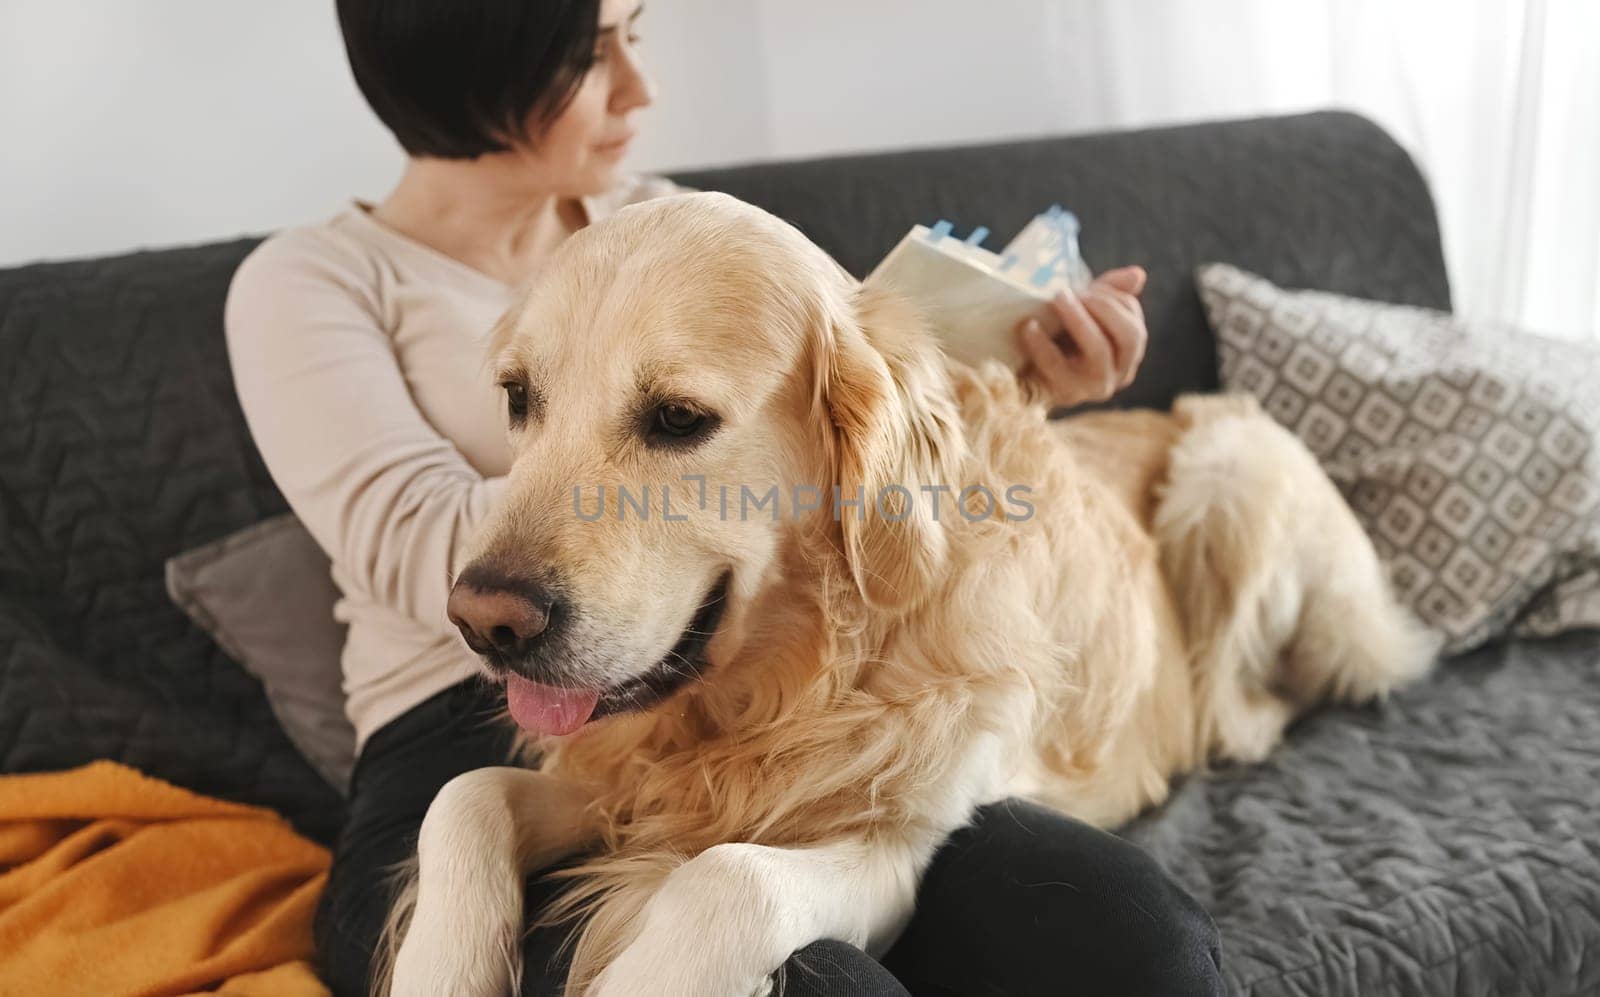 Pretty girl with golden retriever dog reading book sitting on sofa at home. Young woman and purebred pet doggy labrador resting at home.